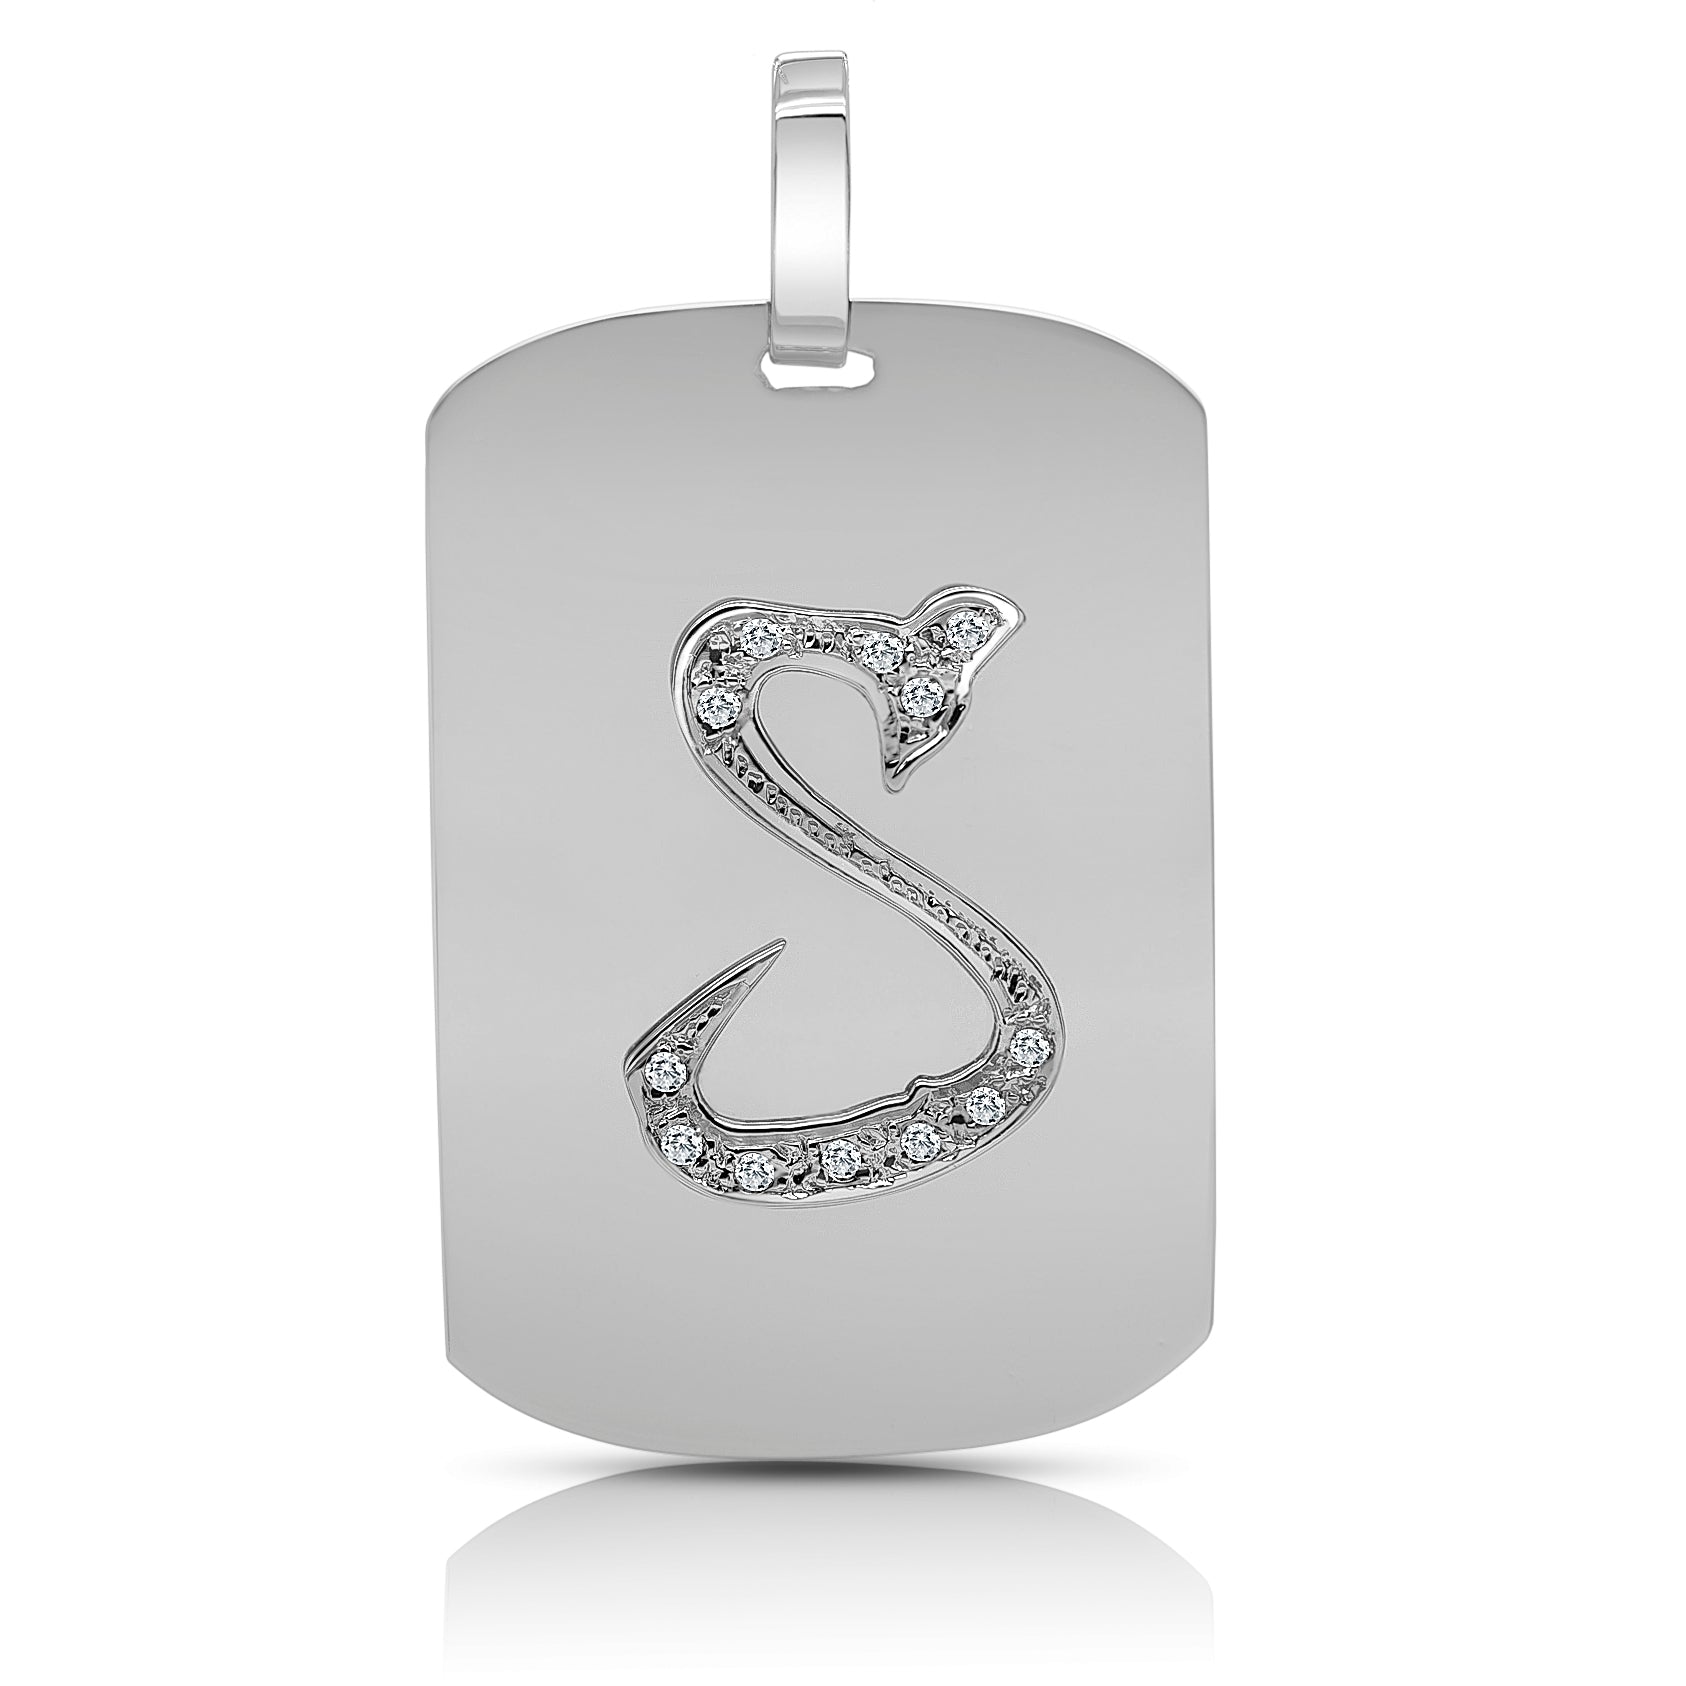 Silver dog tag with engraved letter adorned with diamonds on a white background